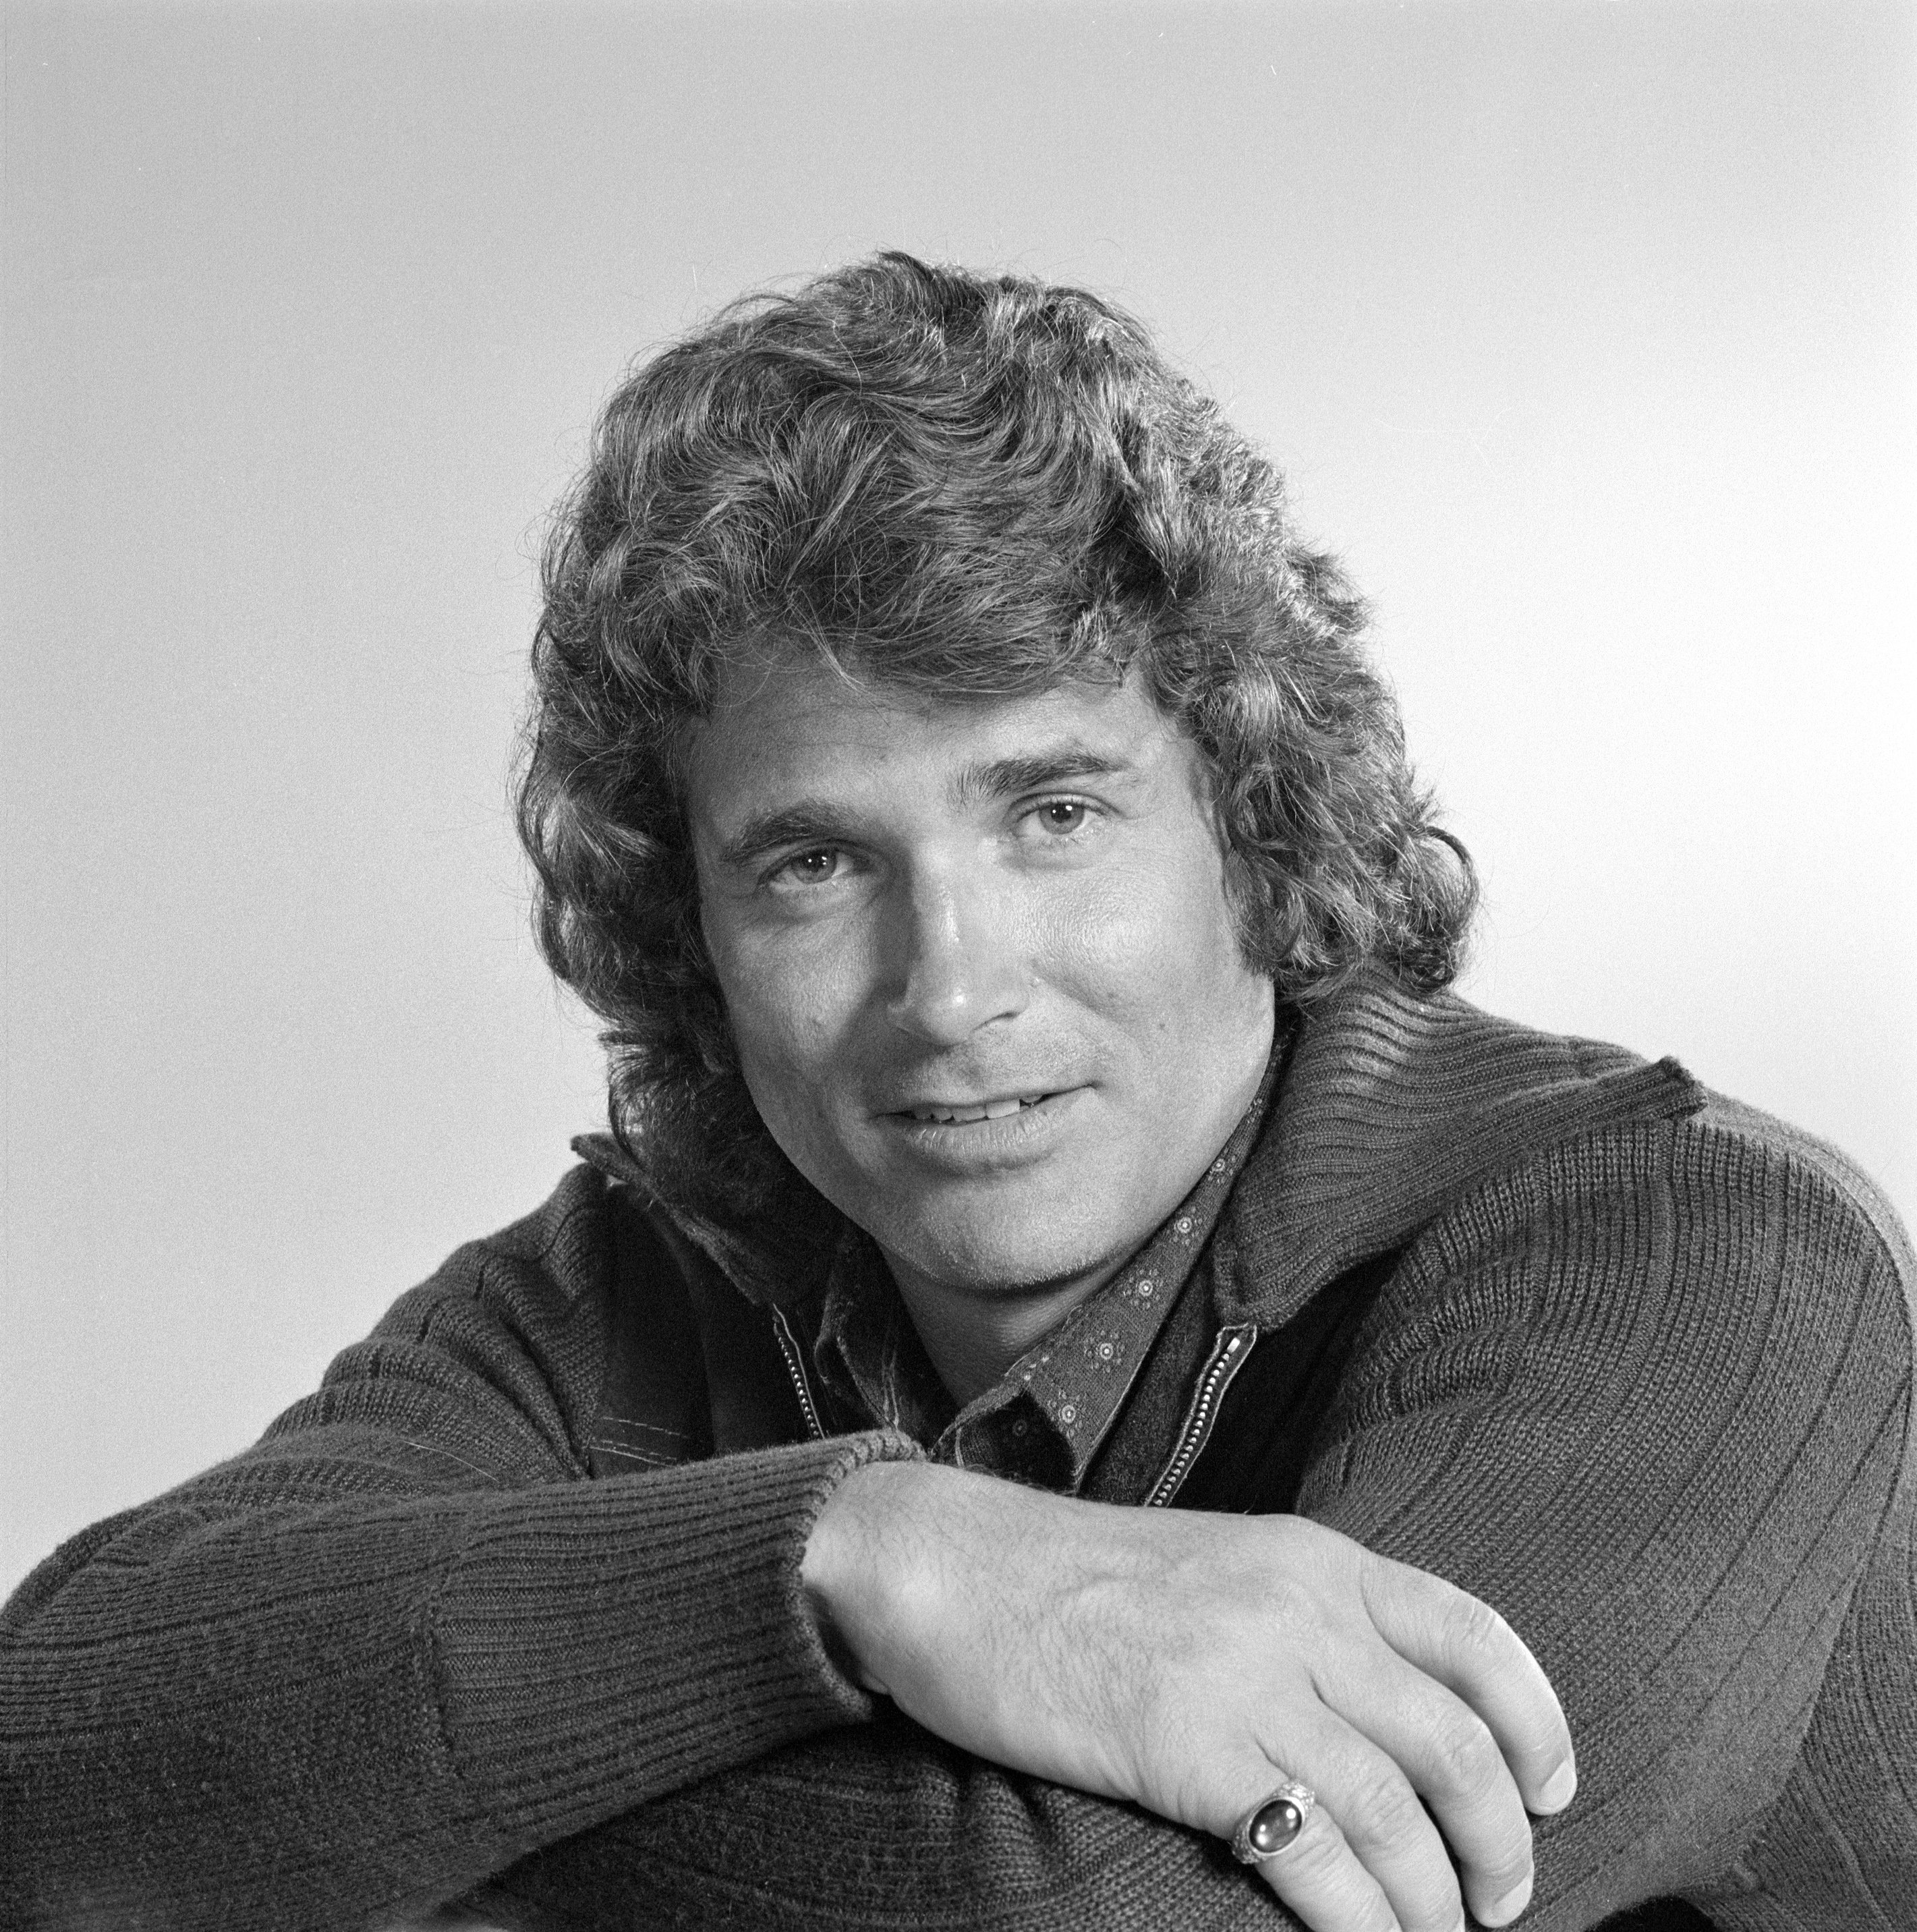 Michael Landon photographed for "American Jr. Miss" on March 26, 1974, in Los Angeles. | Source: Getty Images